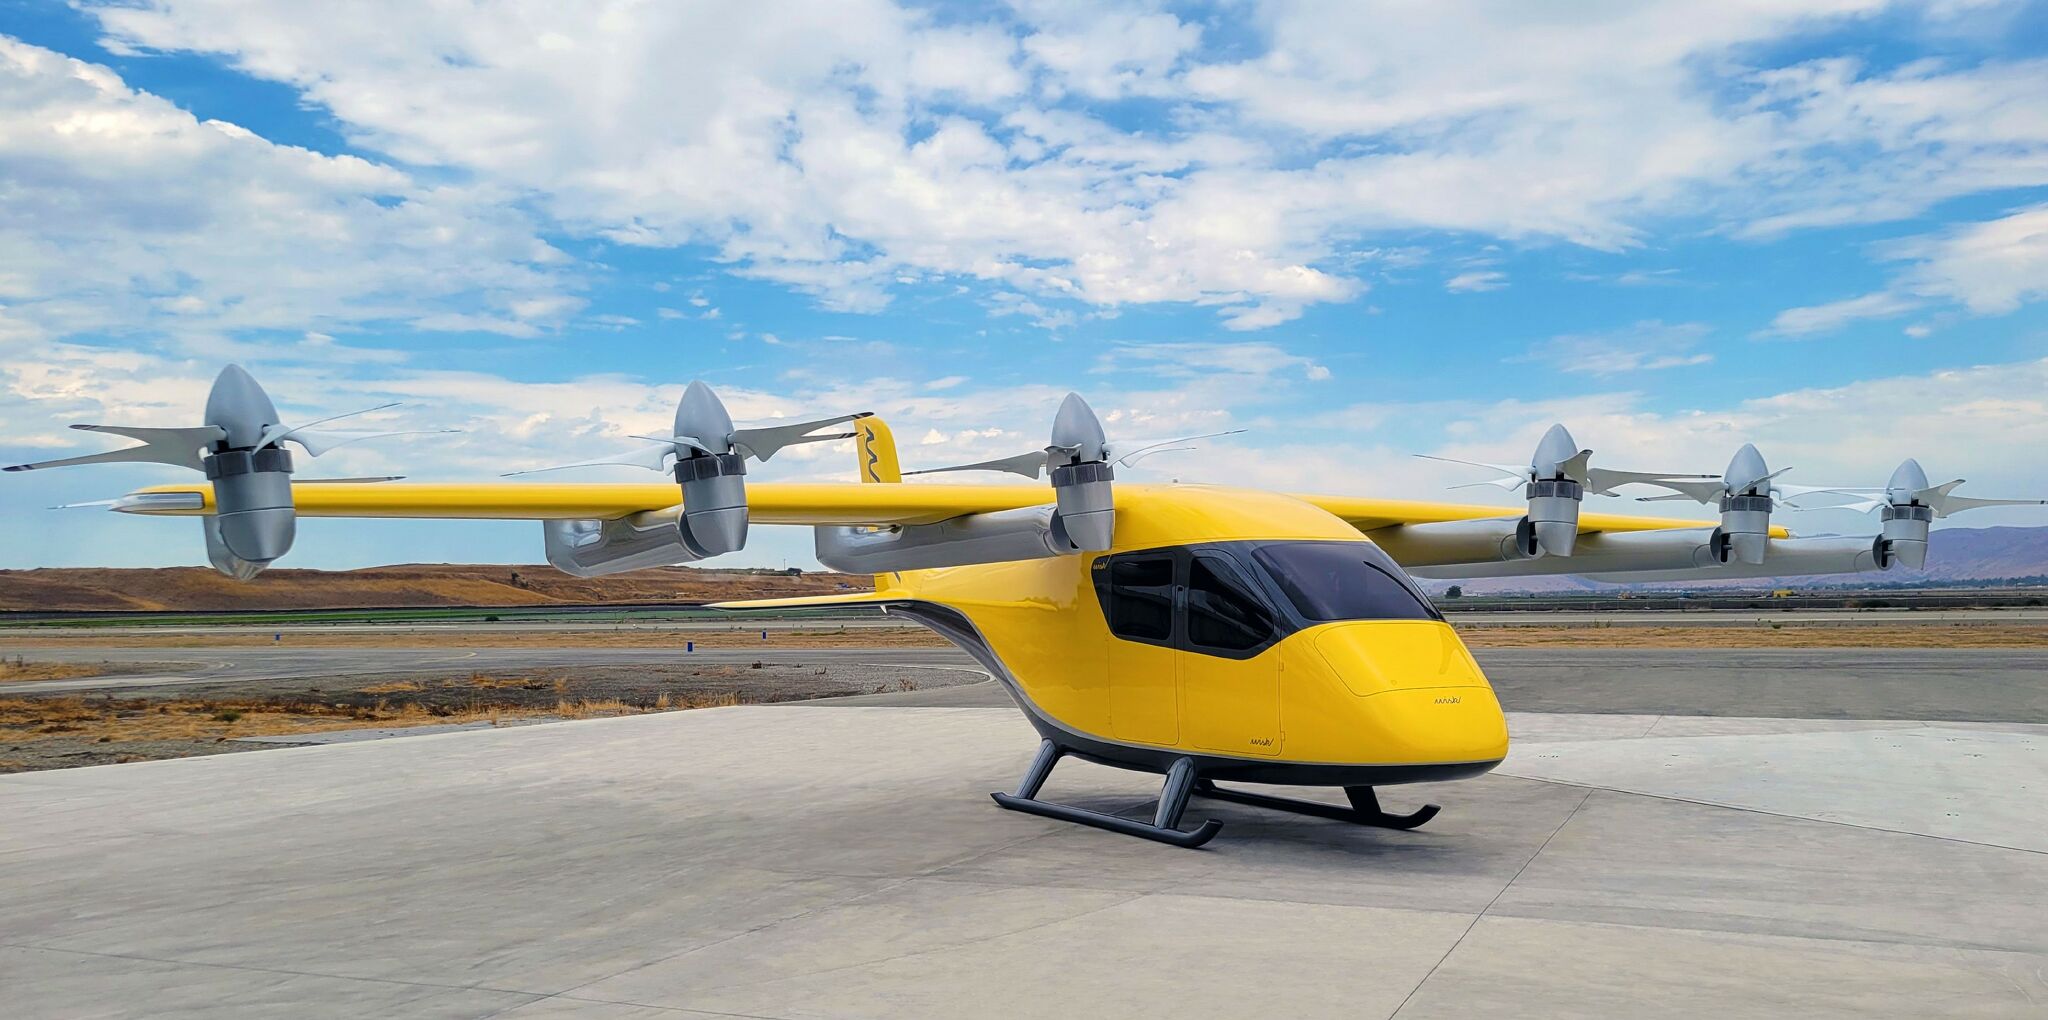 Air taxi company tabs Houston-area airport for takeoff pad